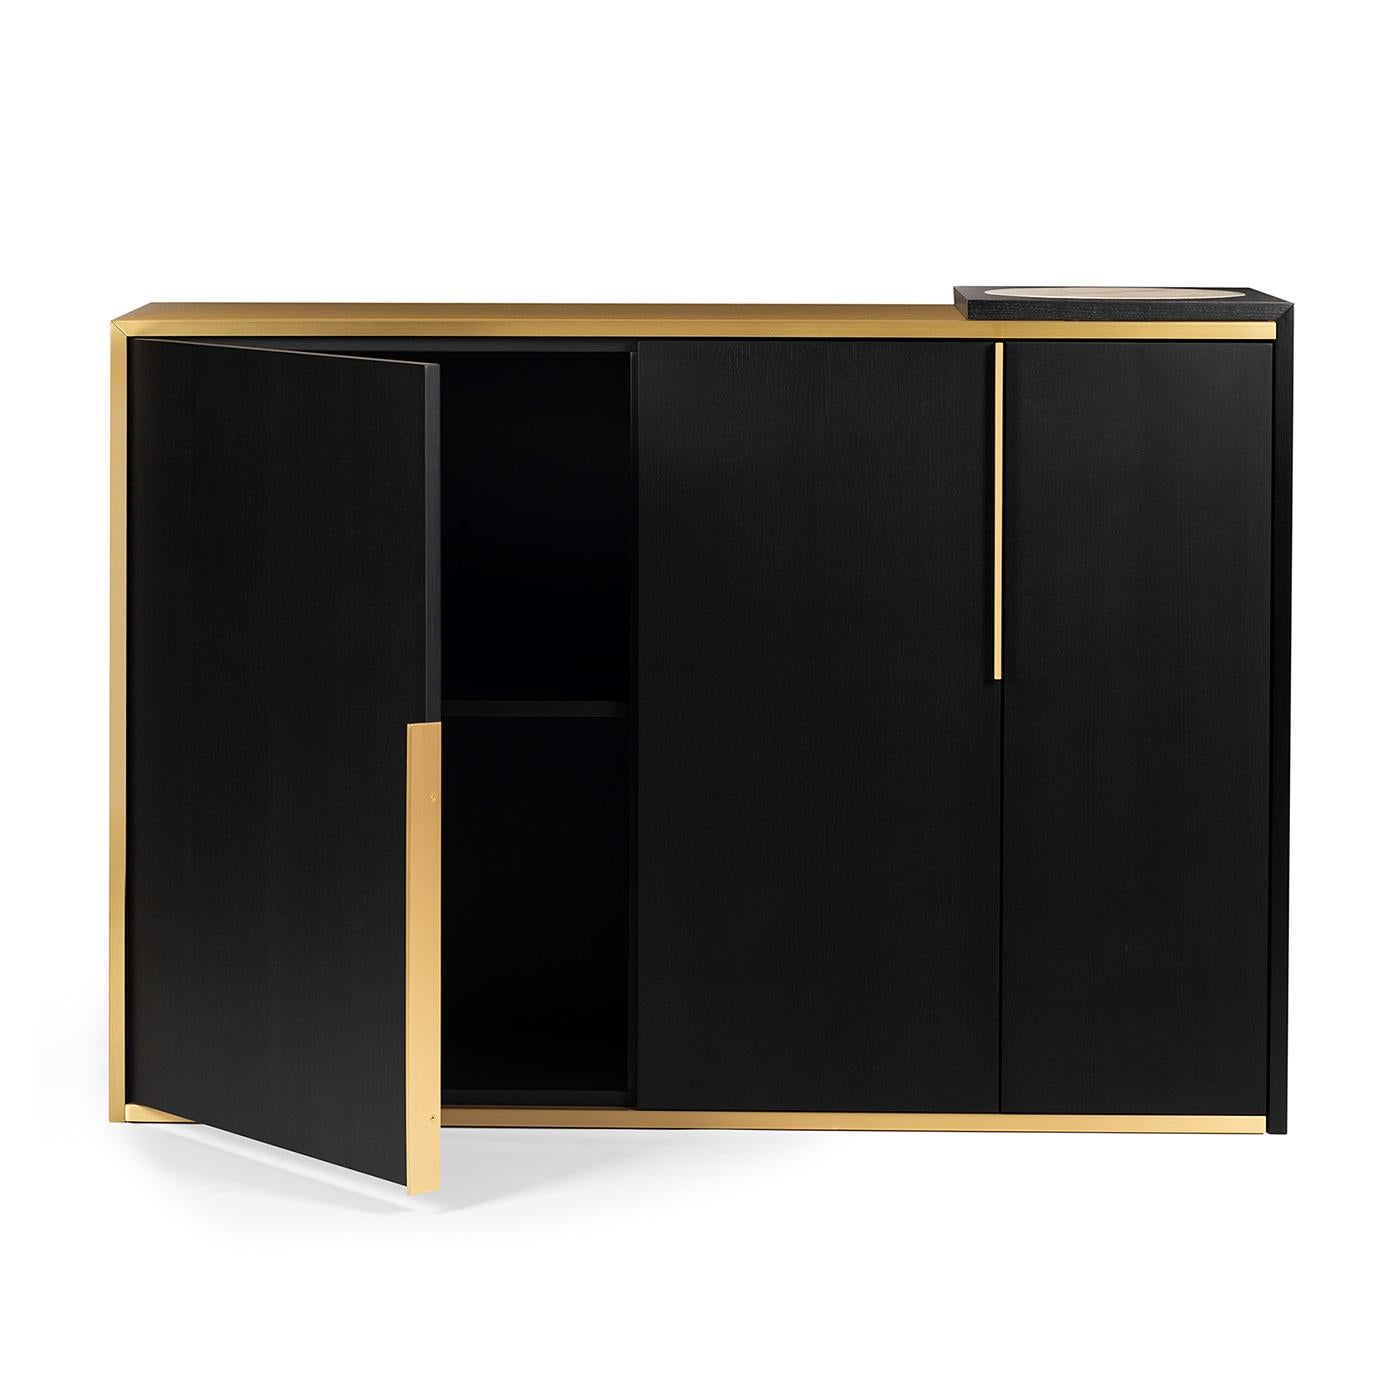 A timeless design of utmost elegance, this cabinet is defined by a rectangular silhouette with an almost seamless aesthetic. Handcrafted of black ash, it is enriched with satin brass details that illuminate it like a splendid glimmer of light. The